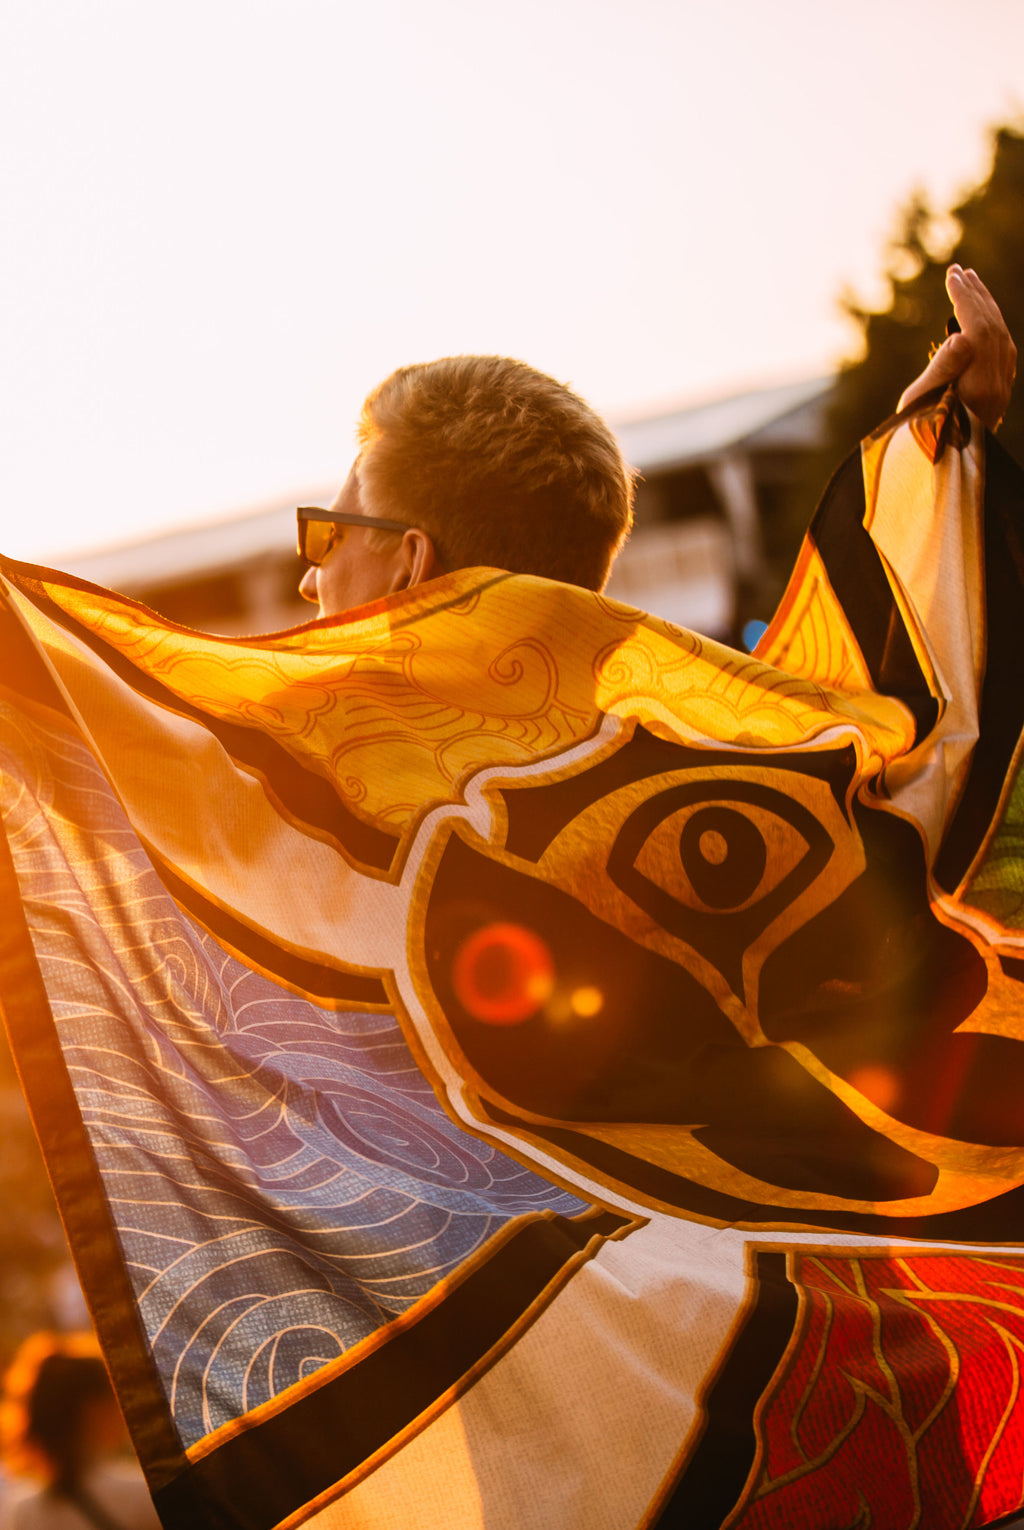 OFFICIAL TOMORROWLAND FLAG